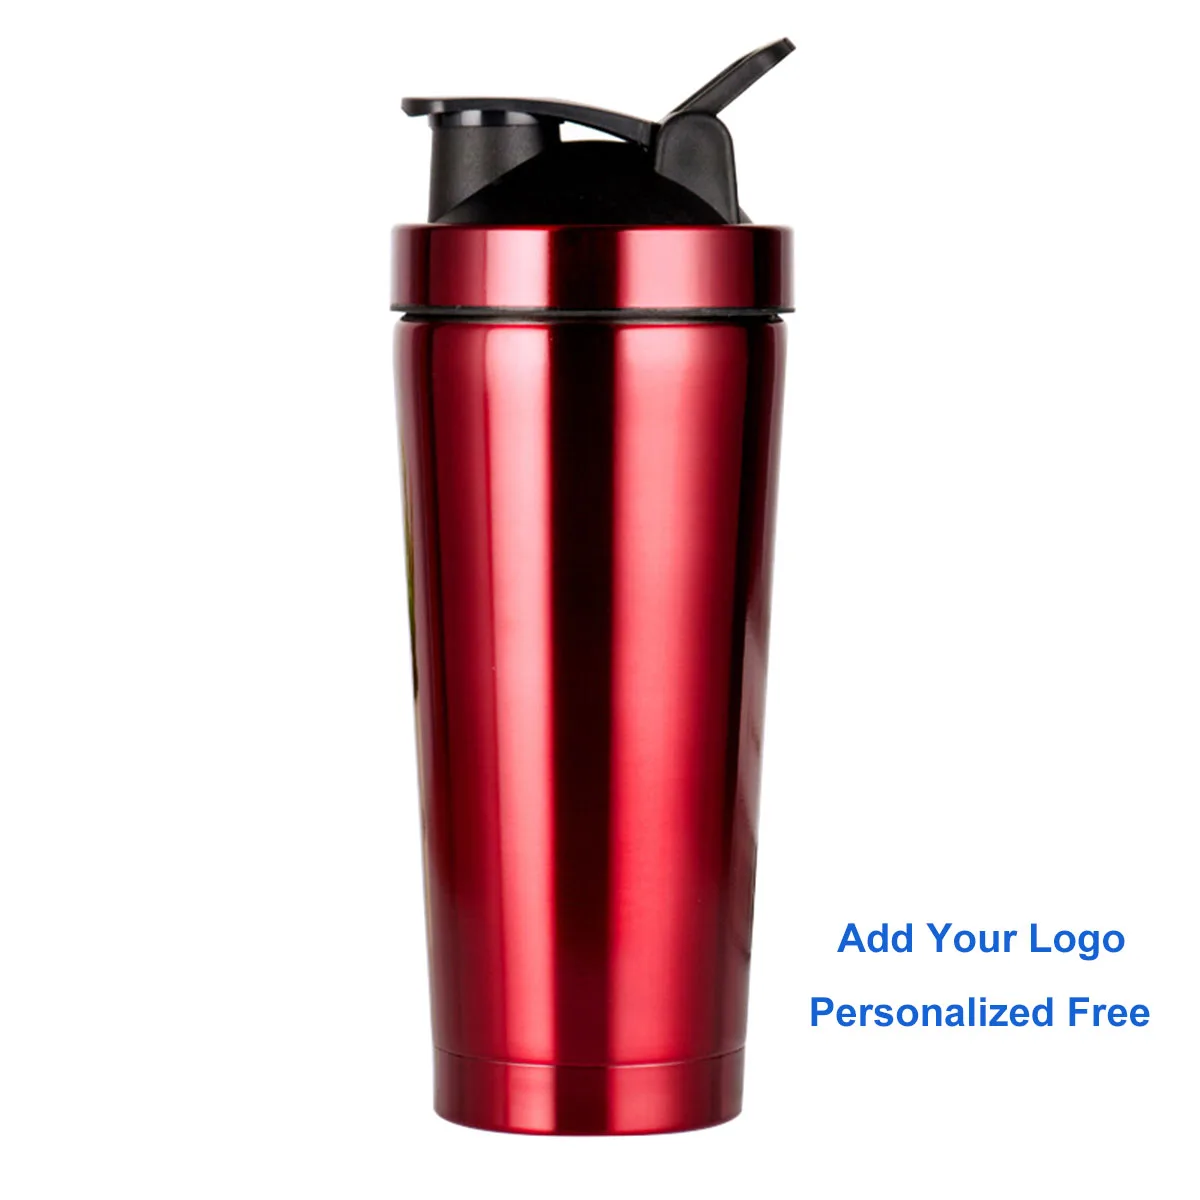 https://ae01.alicdn.com/kf/S0c3d479441f049fc99ce546a25942887B/Portable-Blender-Bottle-Personalized-Shaker-Bottle-Perfect-for-Protein-Shakes-and-Pre-Workout-Custom-Logo-Thermo.jpg